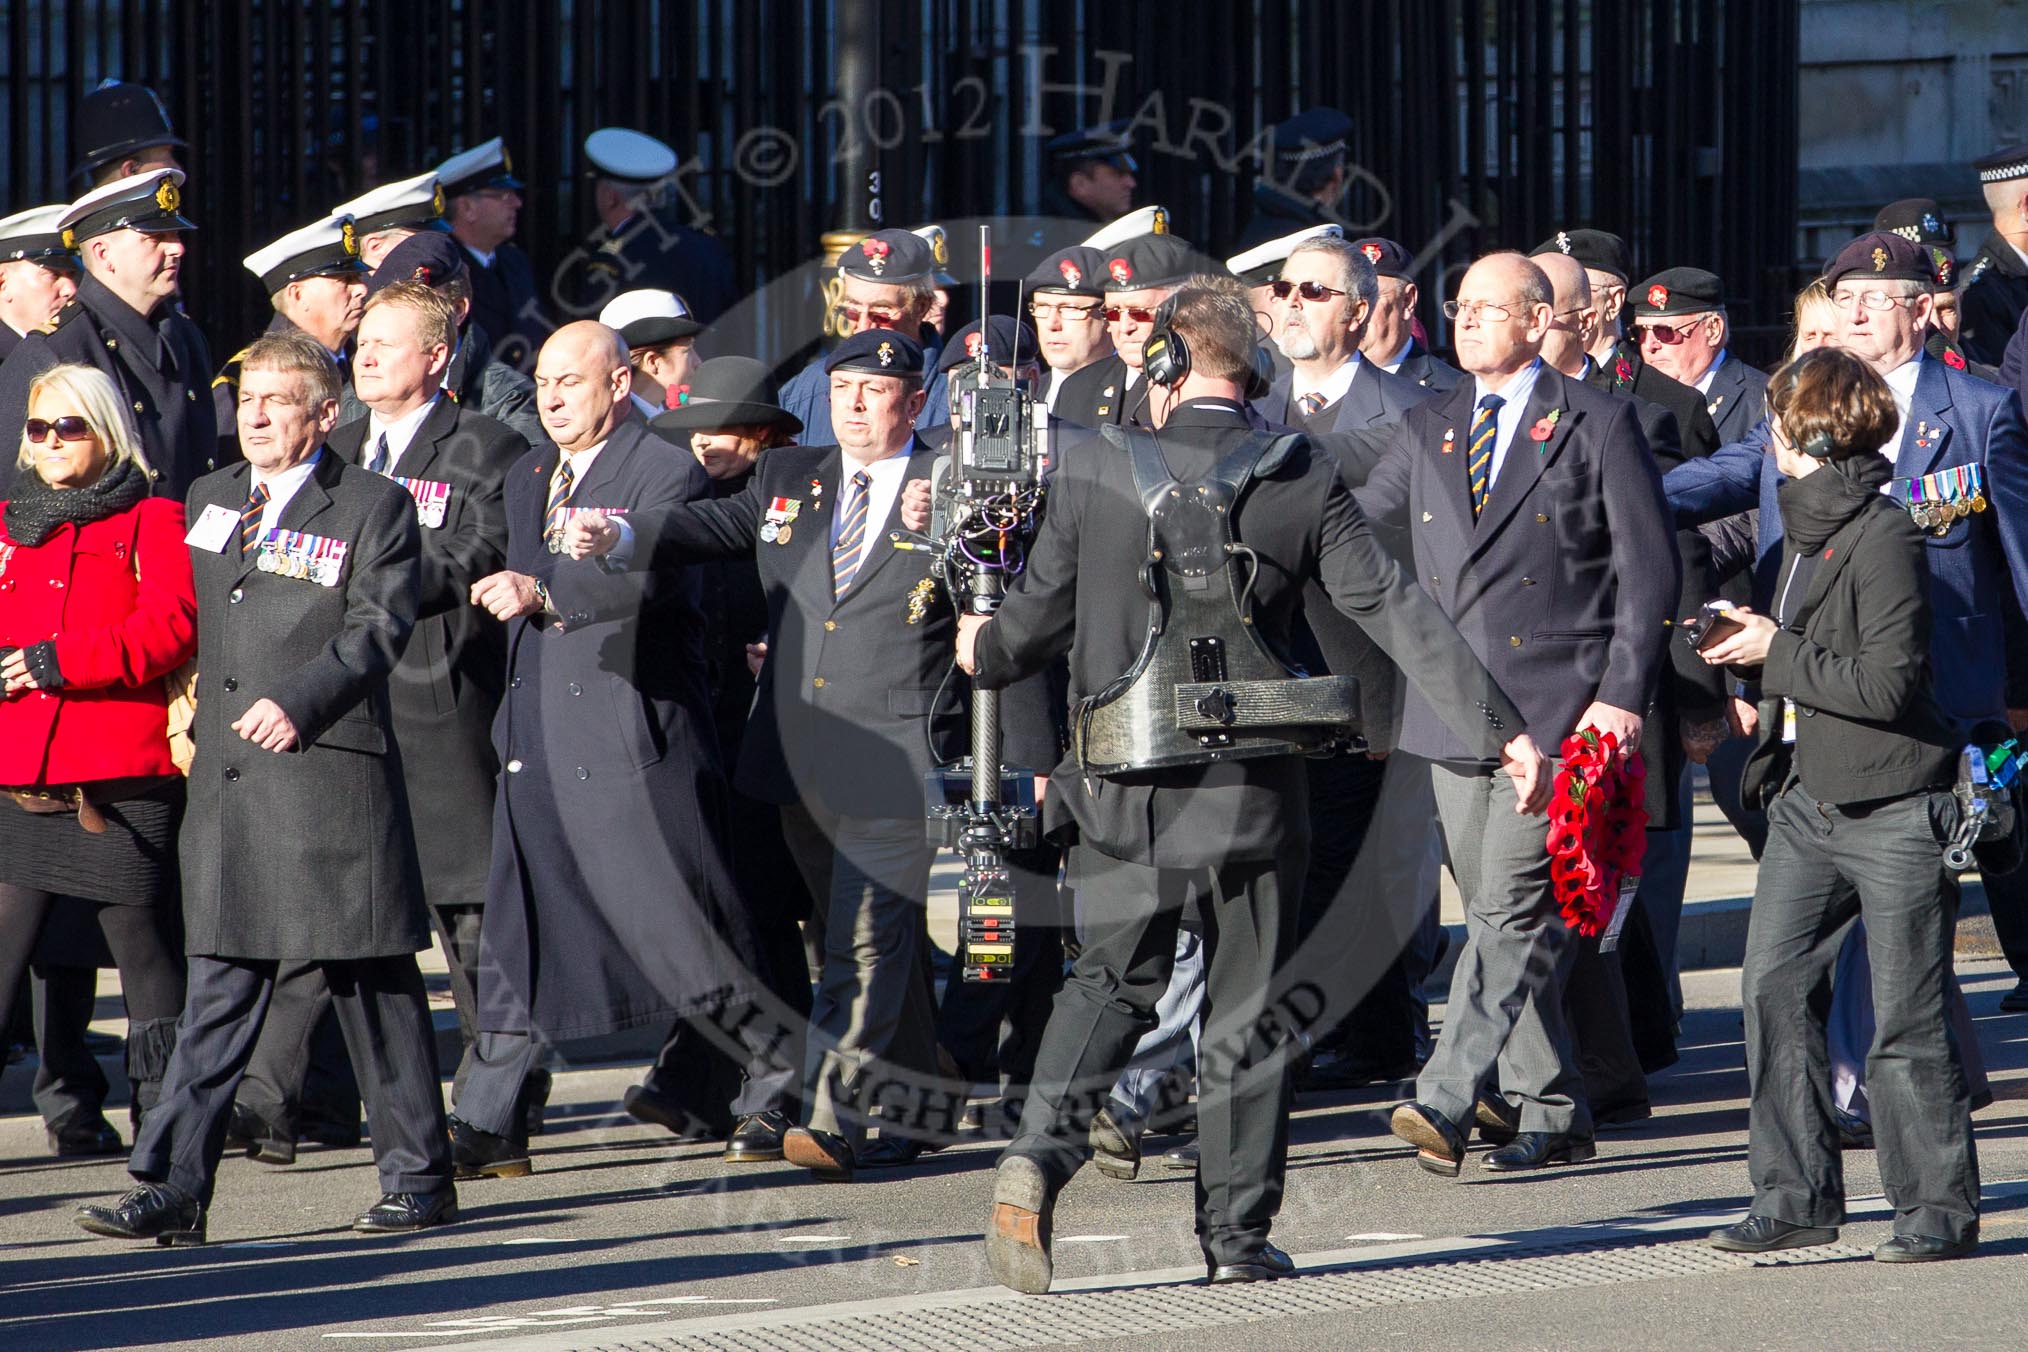 Remembrance Sunday 2012 Cenotaph March Past: Group B2, Royal Electrical & Mechanical Engineers Association..
Whitehall, Cenotaph,
London SW1,

United Kingdom,
on 11 November 2012 at 11:54, image #809